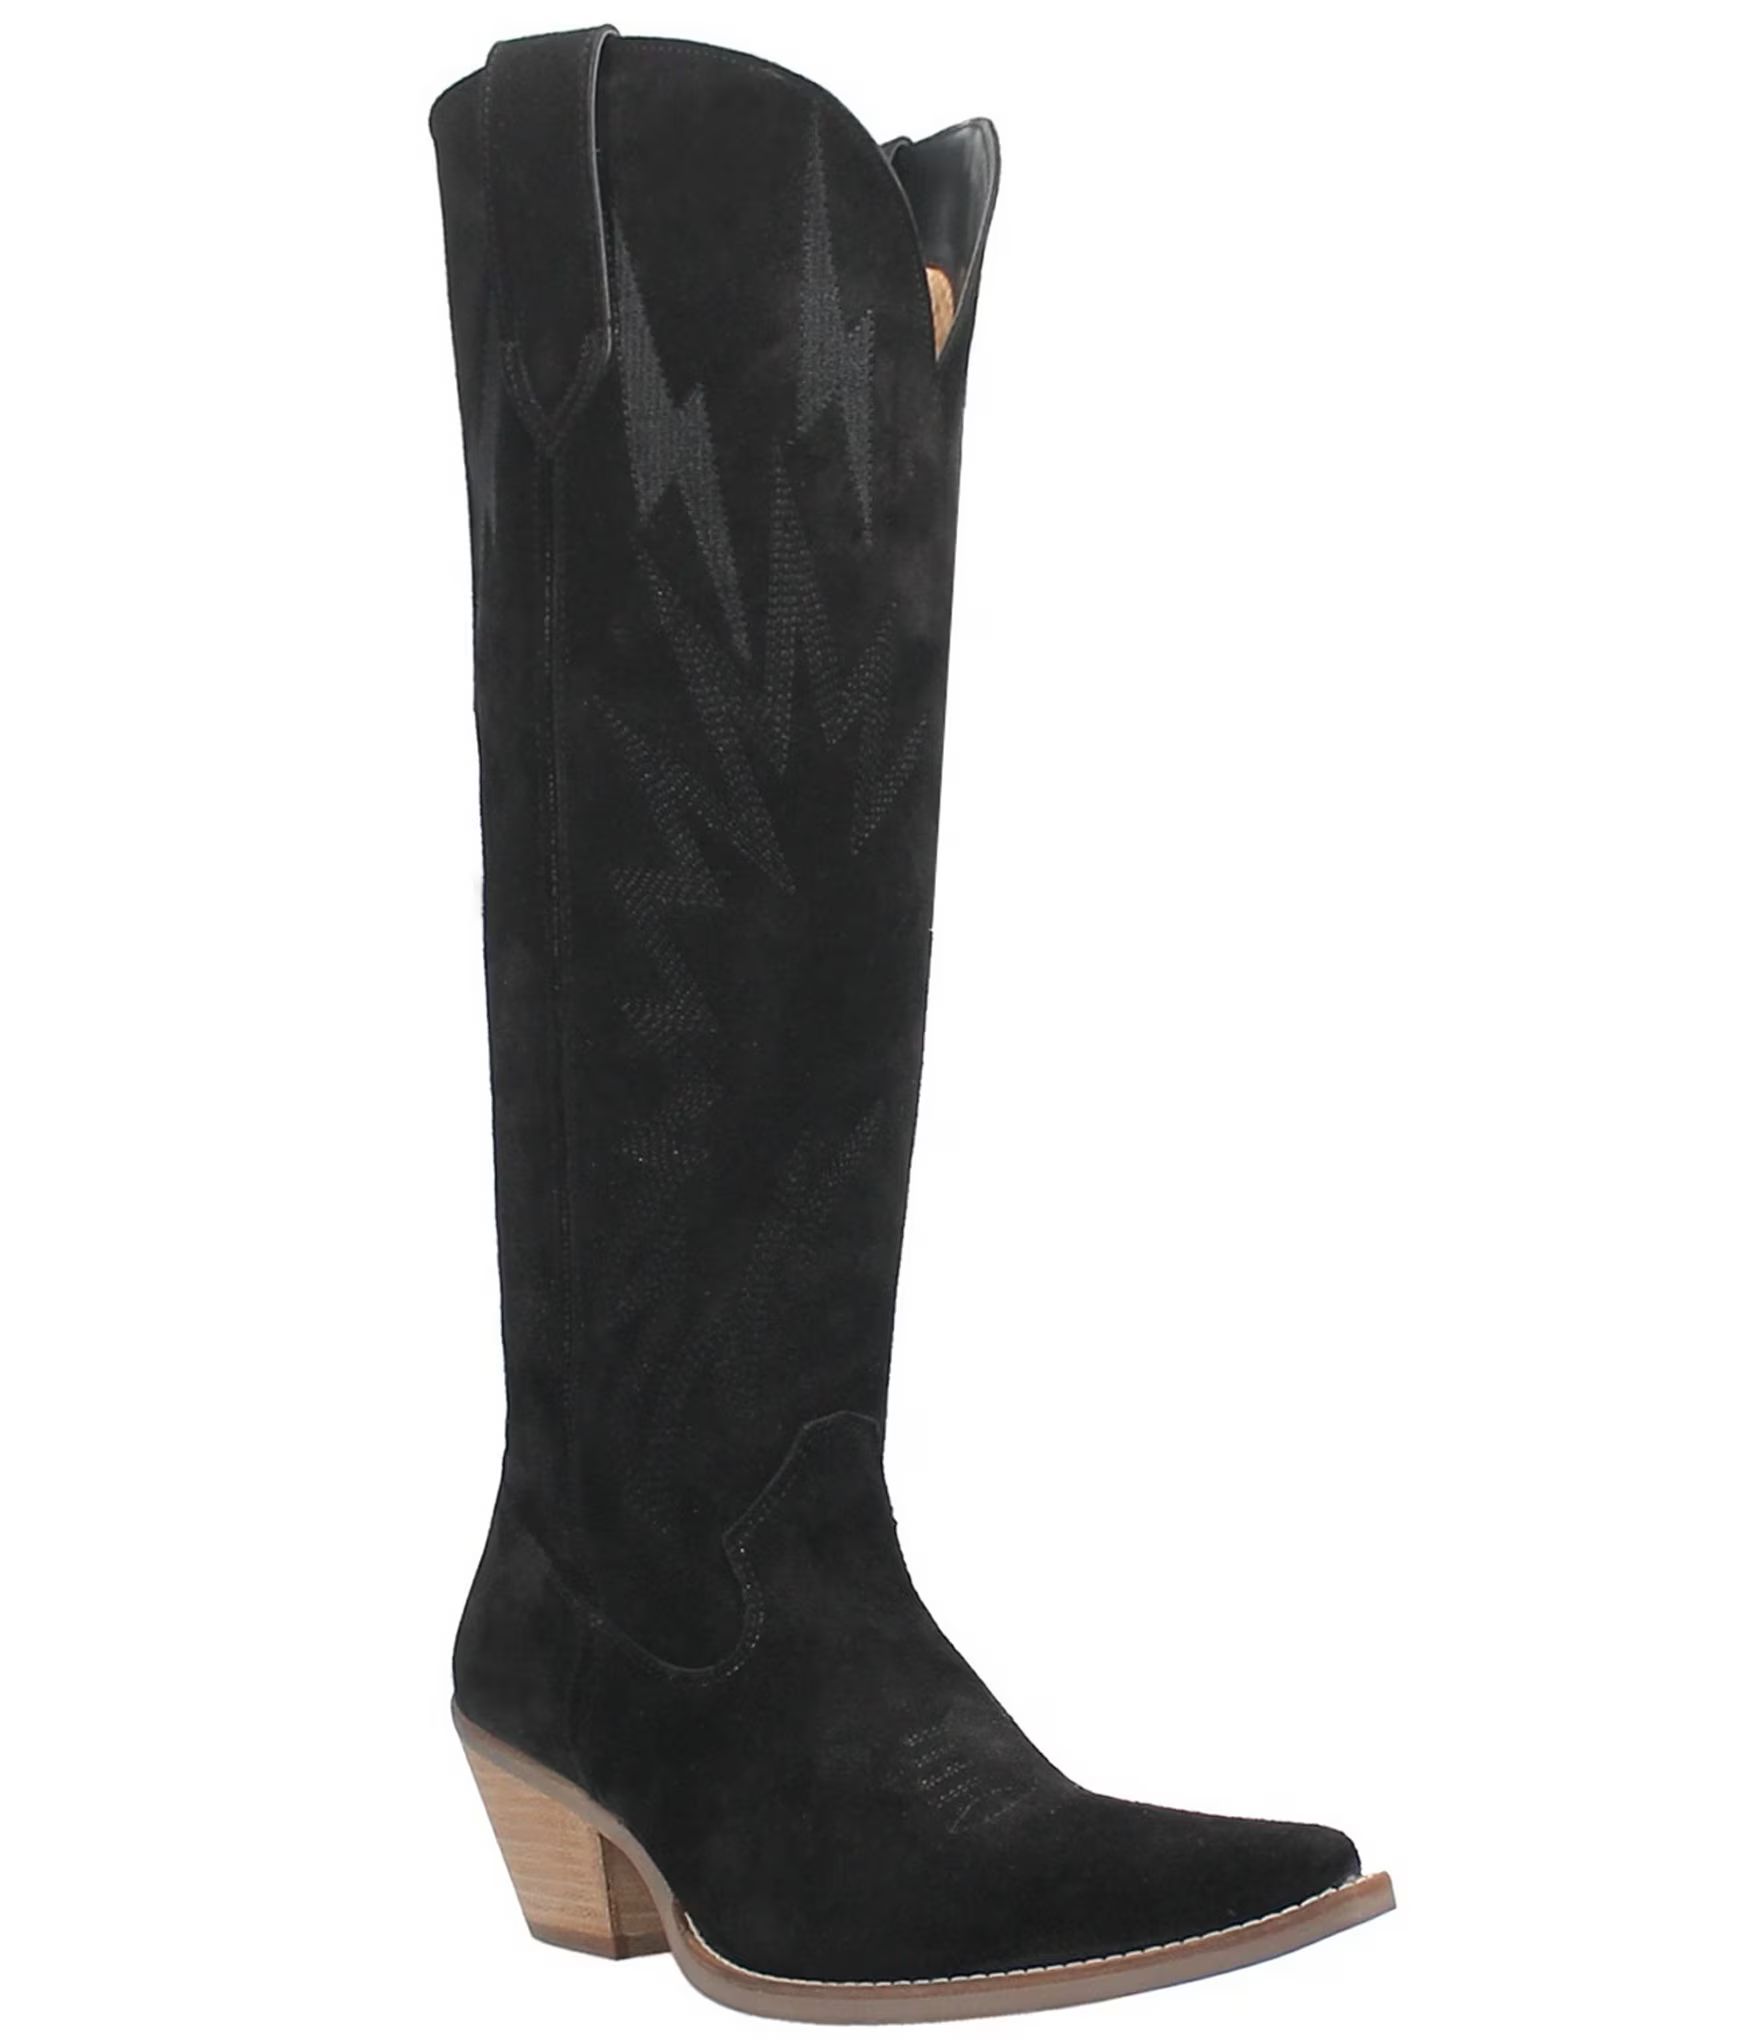 Thunder Road Suede Tall Western Boots | Dillard's